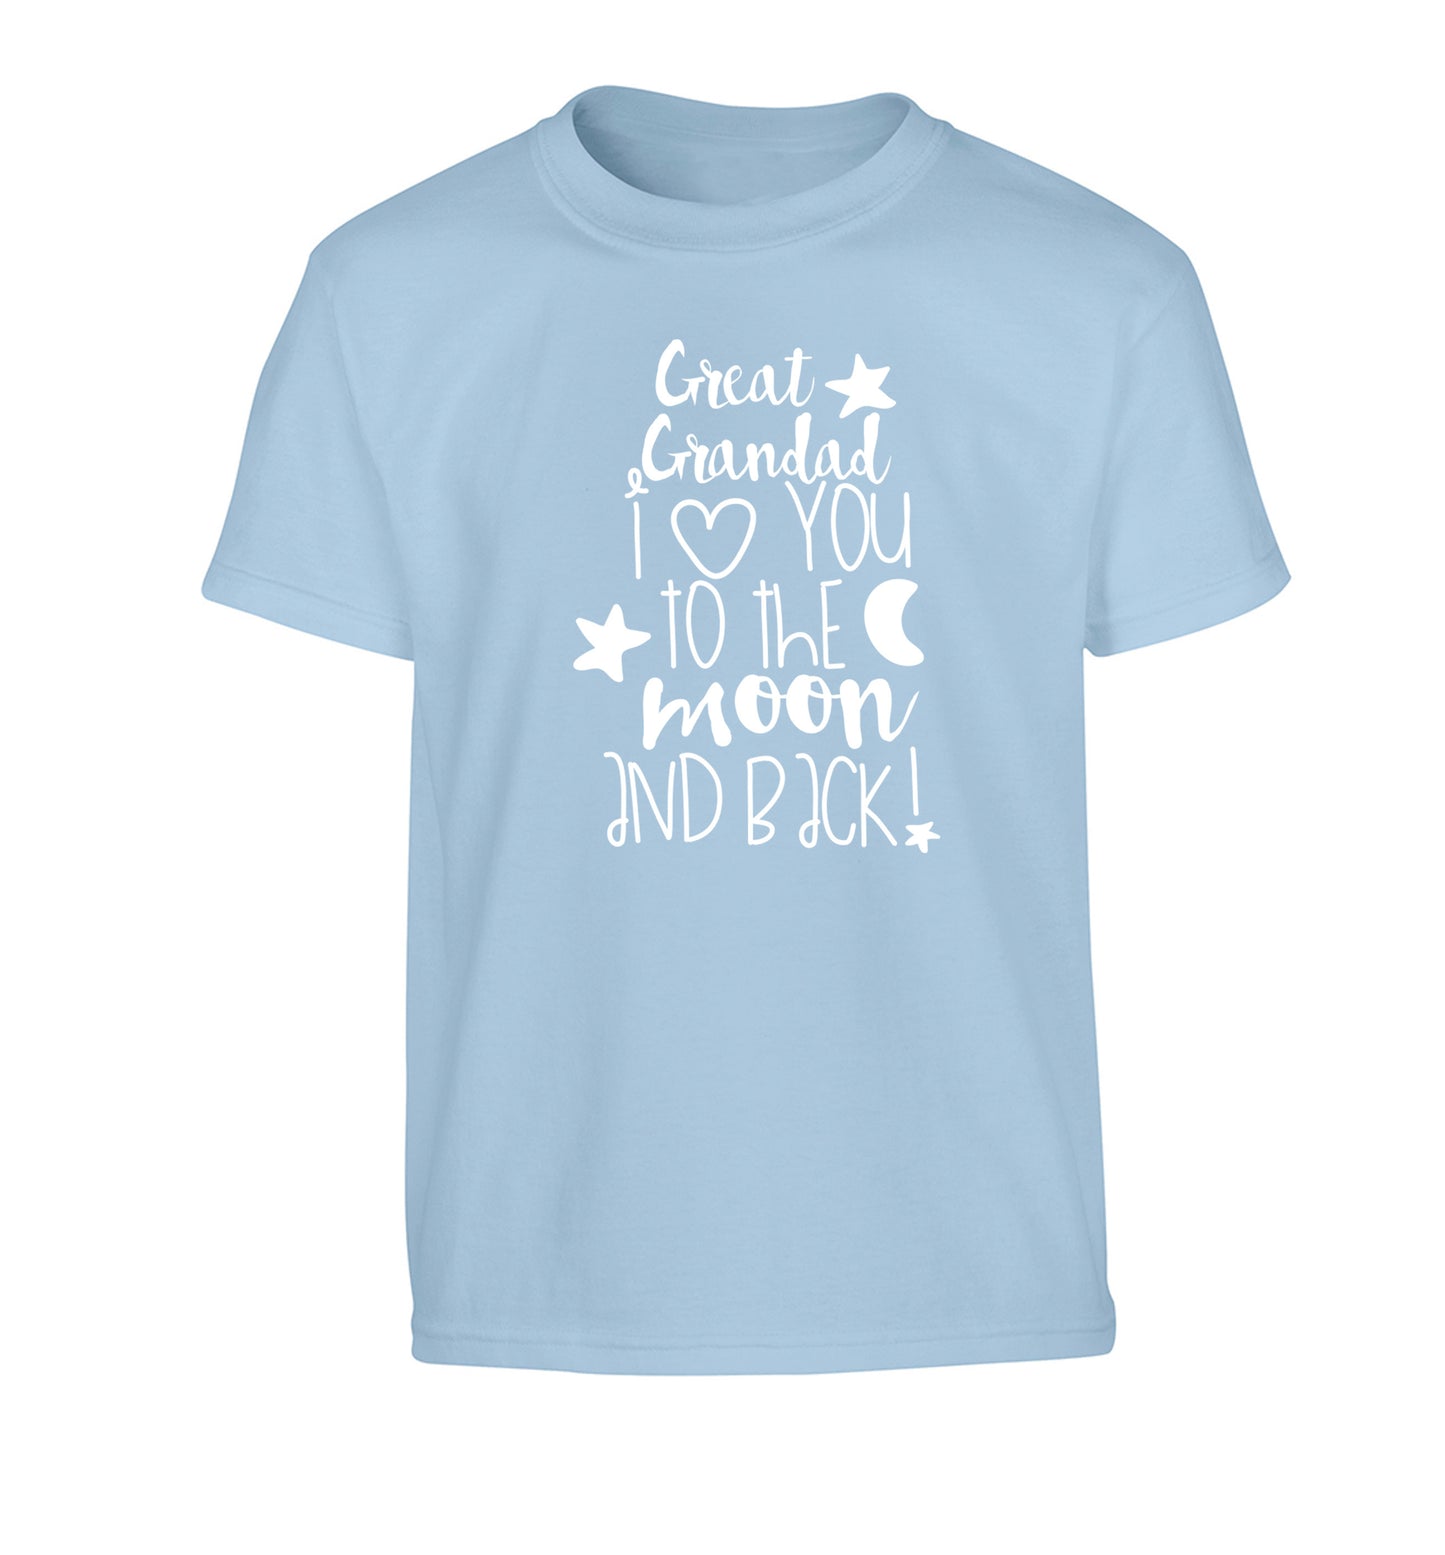 Great Grandad I love you to the moon and back Children's light blue Tshirt 12-14 Years